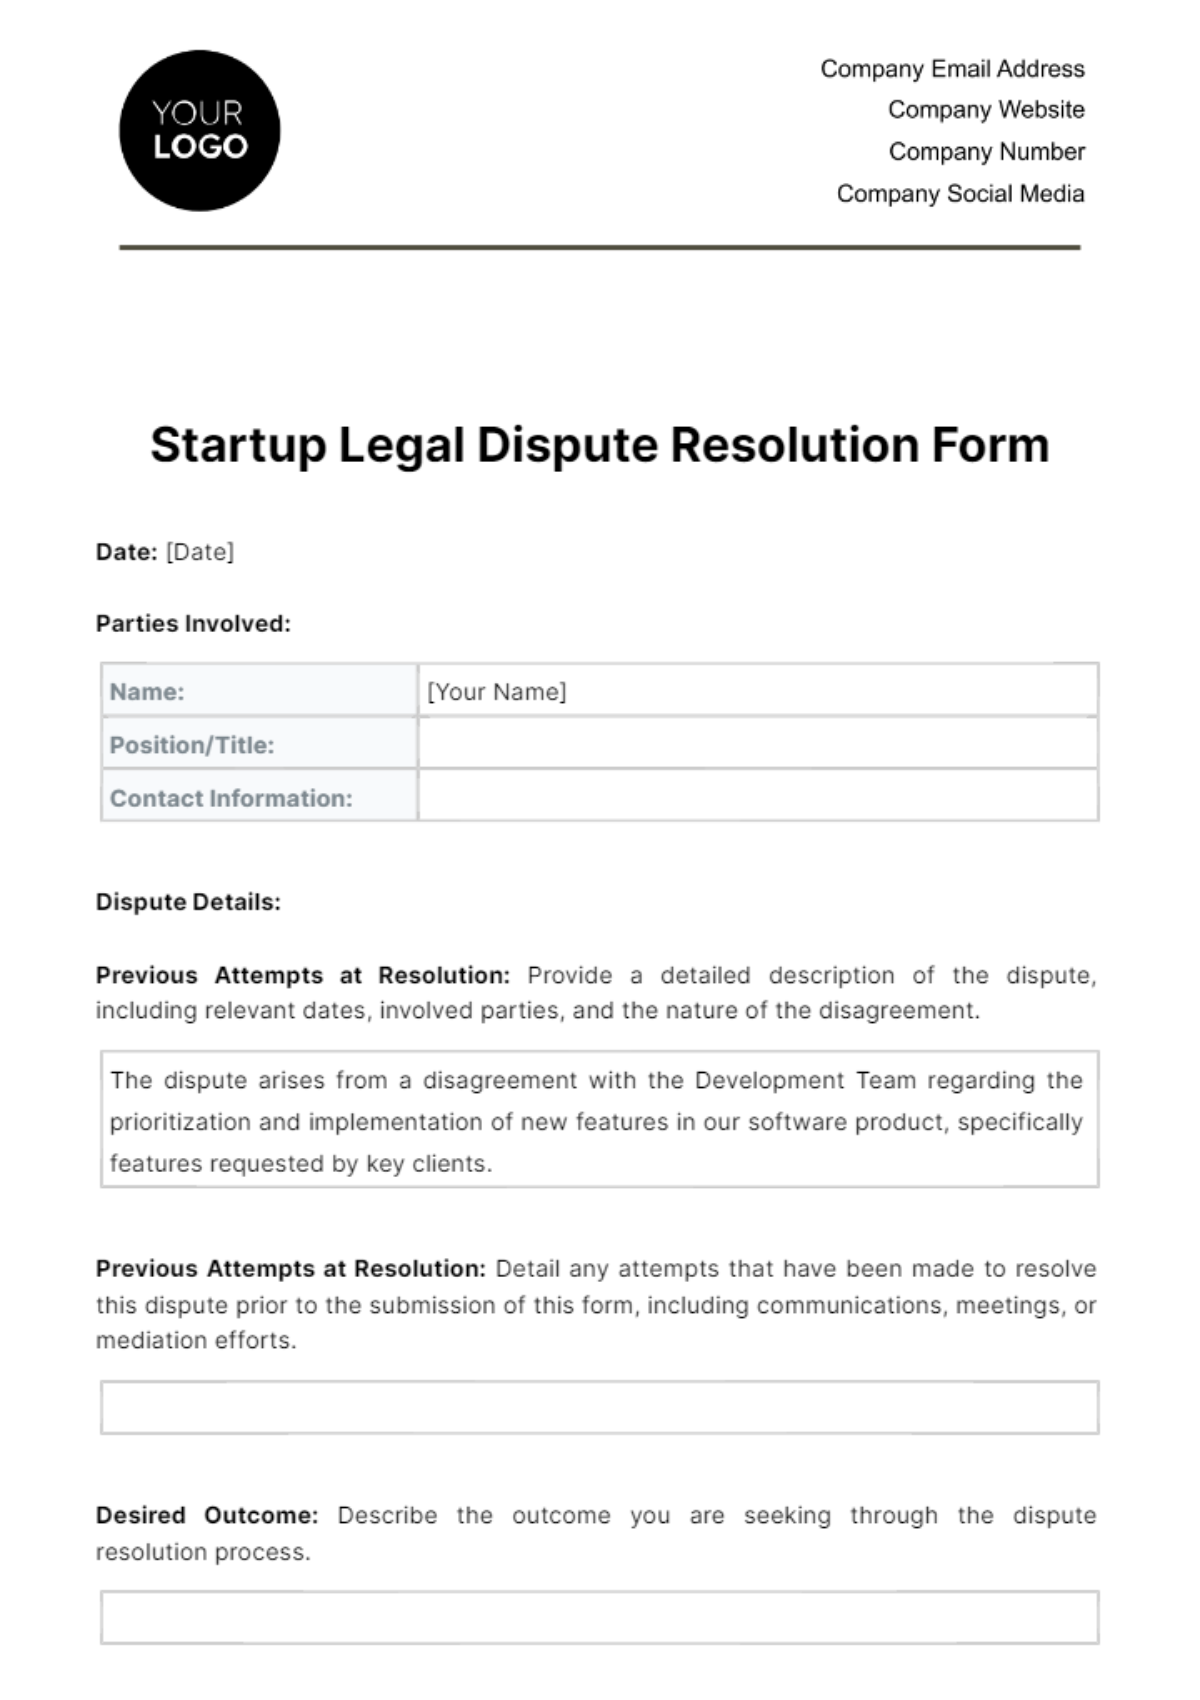 Free Startup Legal Dispute Resolution Form Template